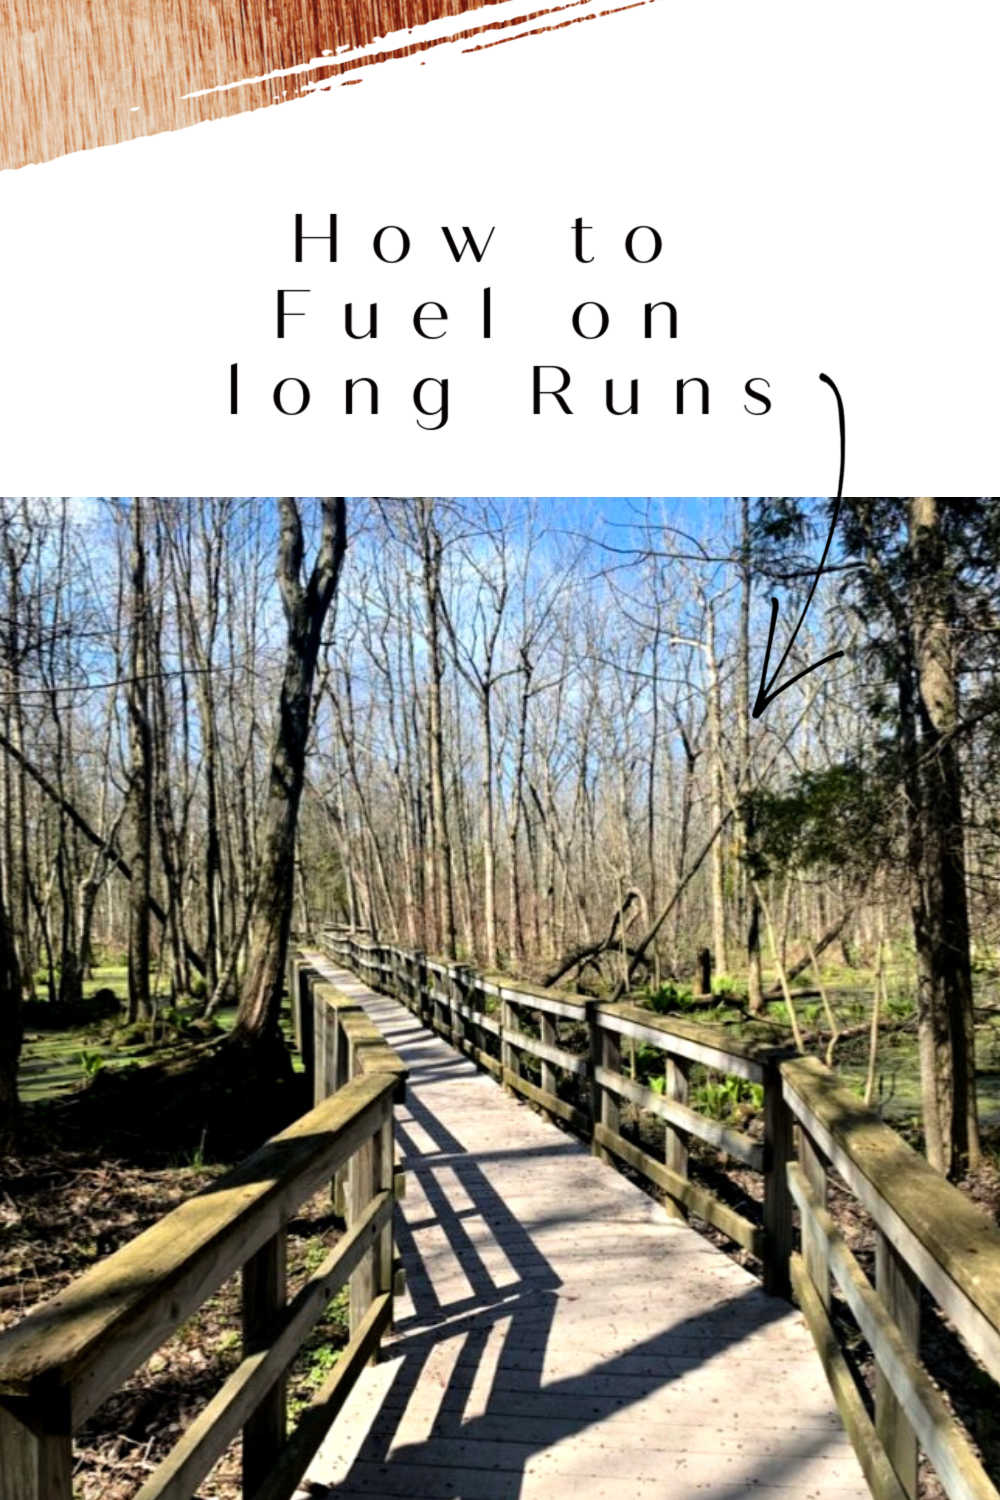 How to Fuel for Long Runs